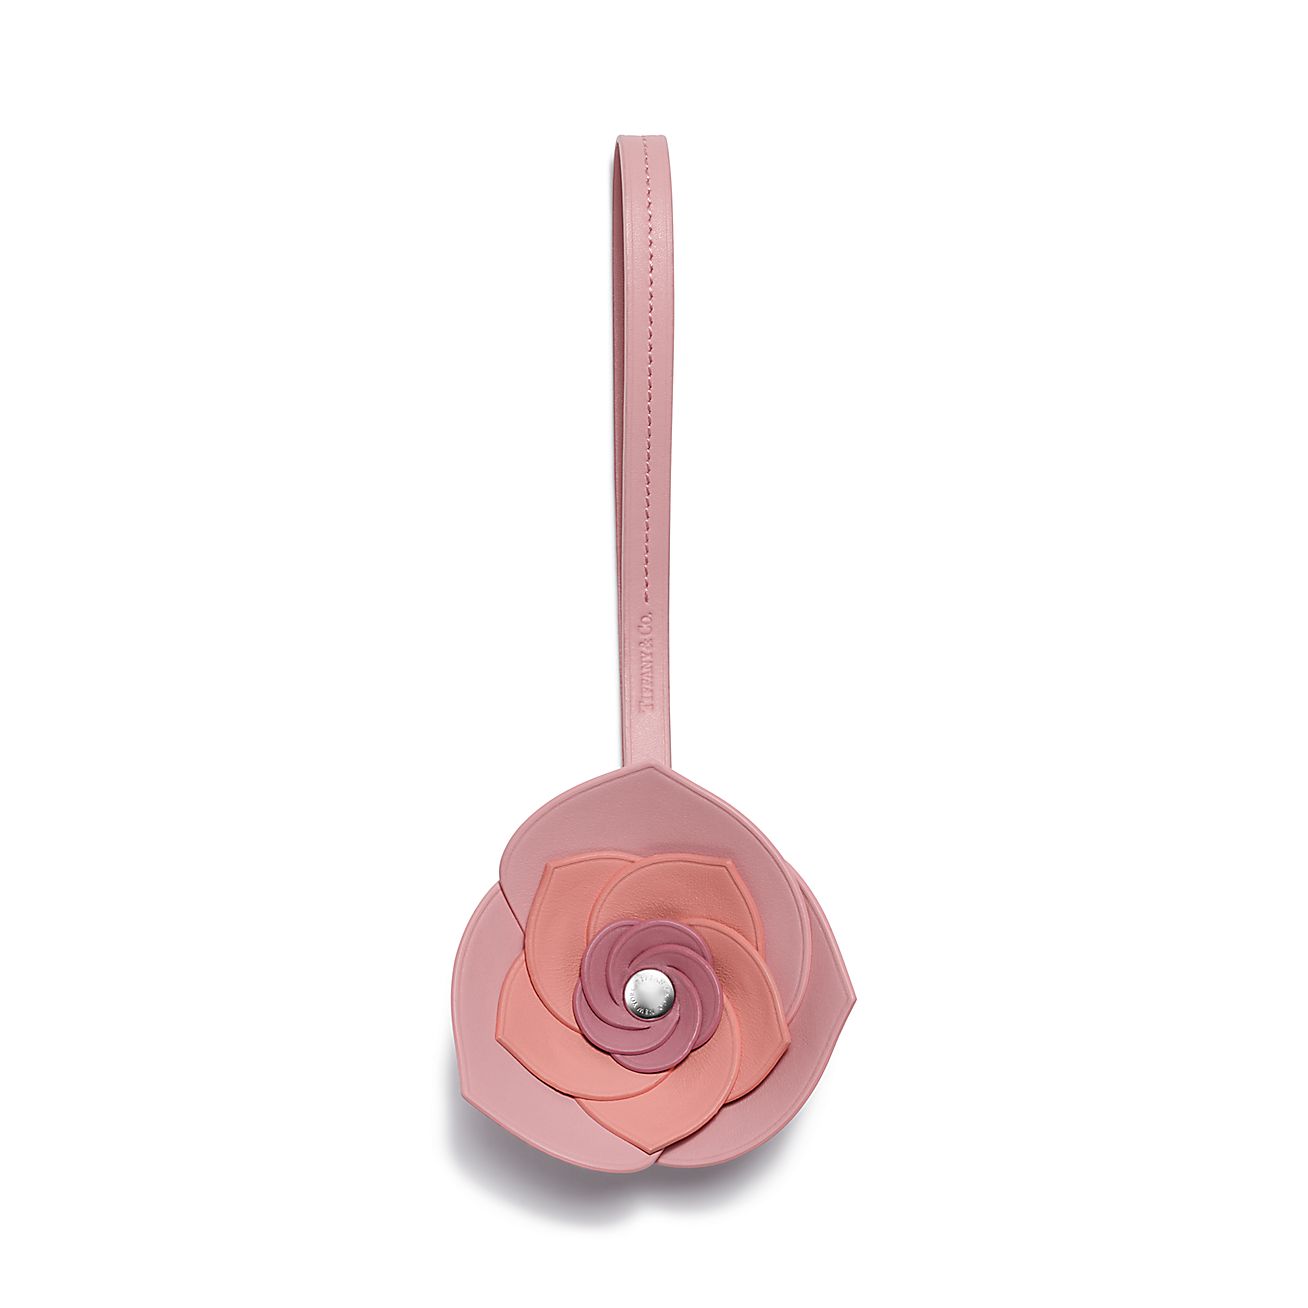 Tiffany & Co.® Flower Bag Charm in Rose Leather